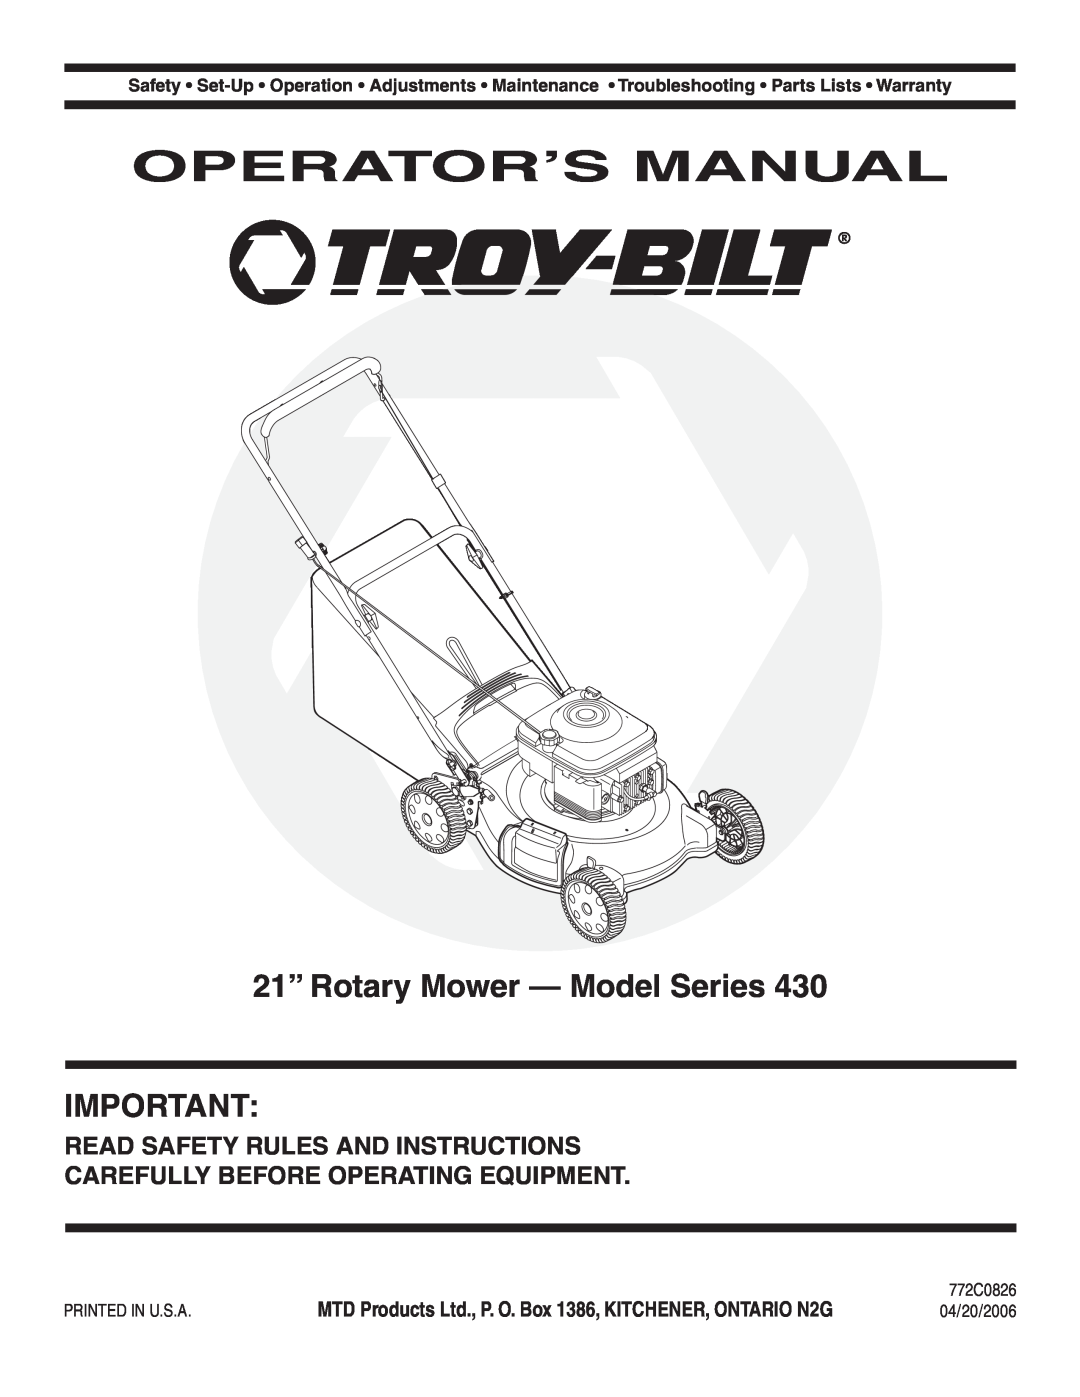 Troy-Bilt 430 warranty Operator’S Manual, 21” Rotary Mower - Model Series, Read Safety Rules And Instructions, 772C0826 